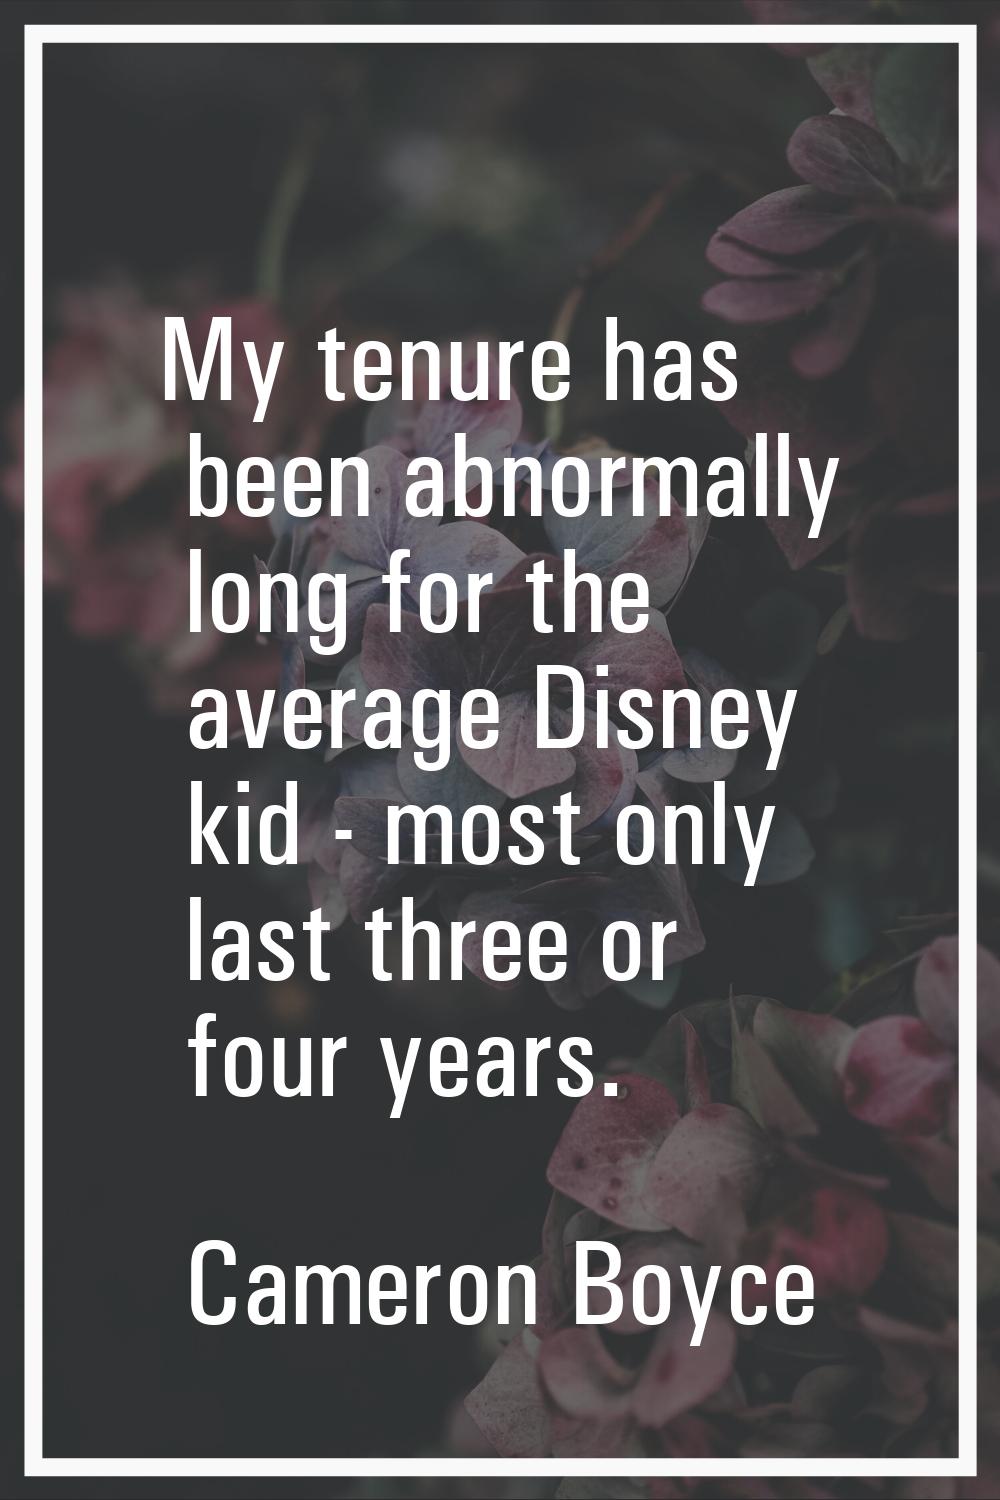 My tenure has been abnormally long for the average Disney kid - most only last three or four years.